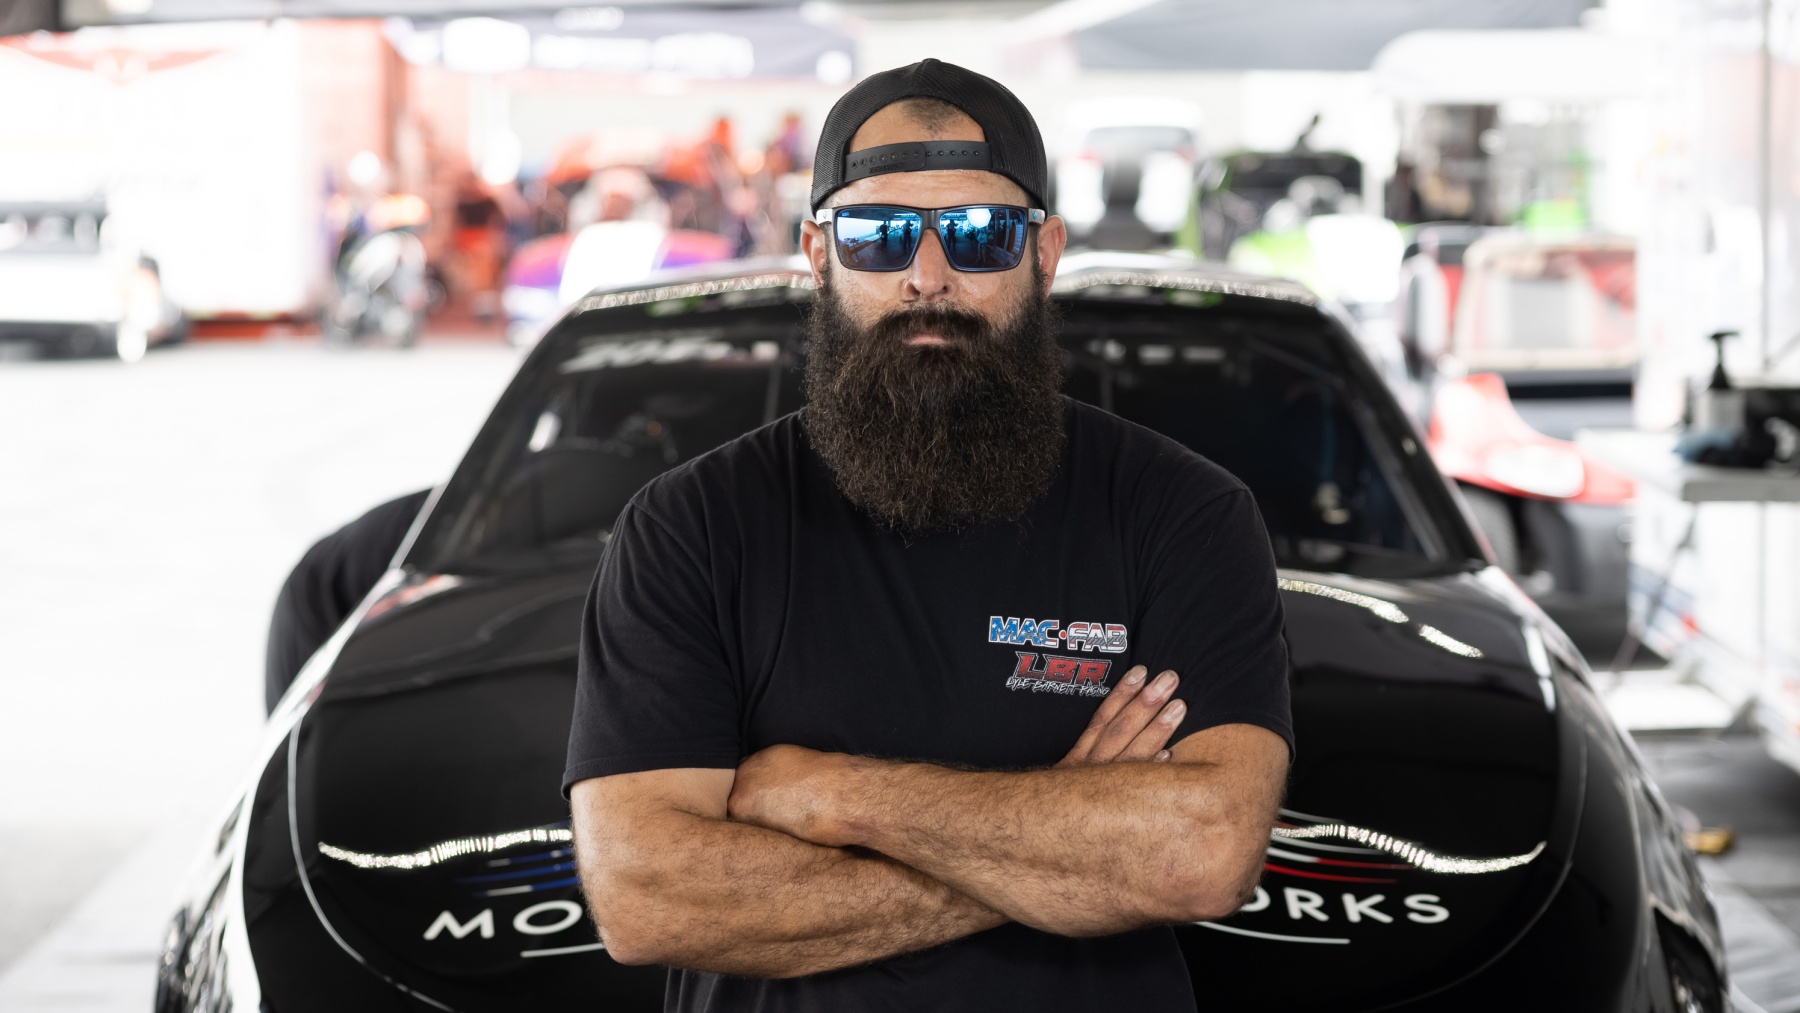 Lyle Barnett the and Opinion, on More \'We\'re WSOPM: Videos With Coming Racing Photos, Illustrated Drag Cuffs | Off\' | News, Interviews, Drag